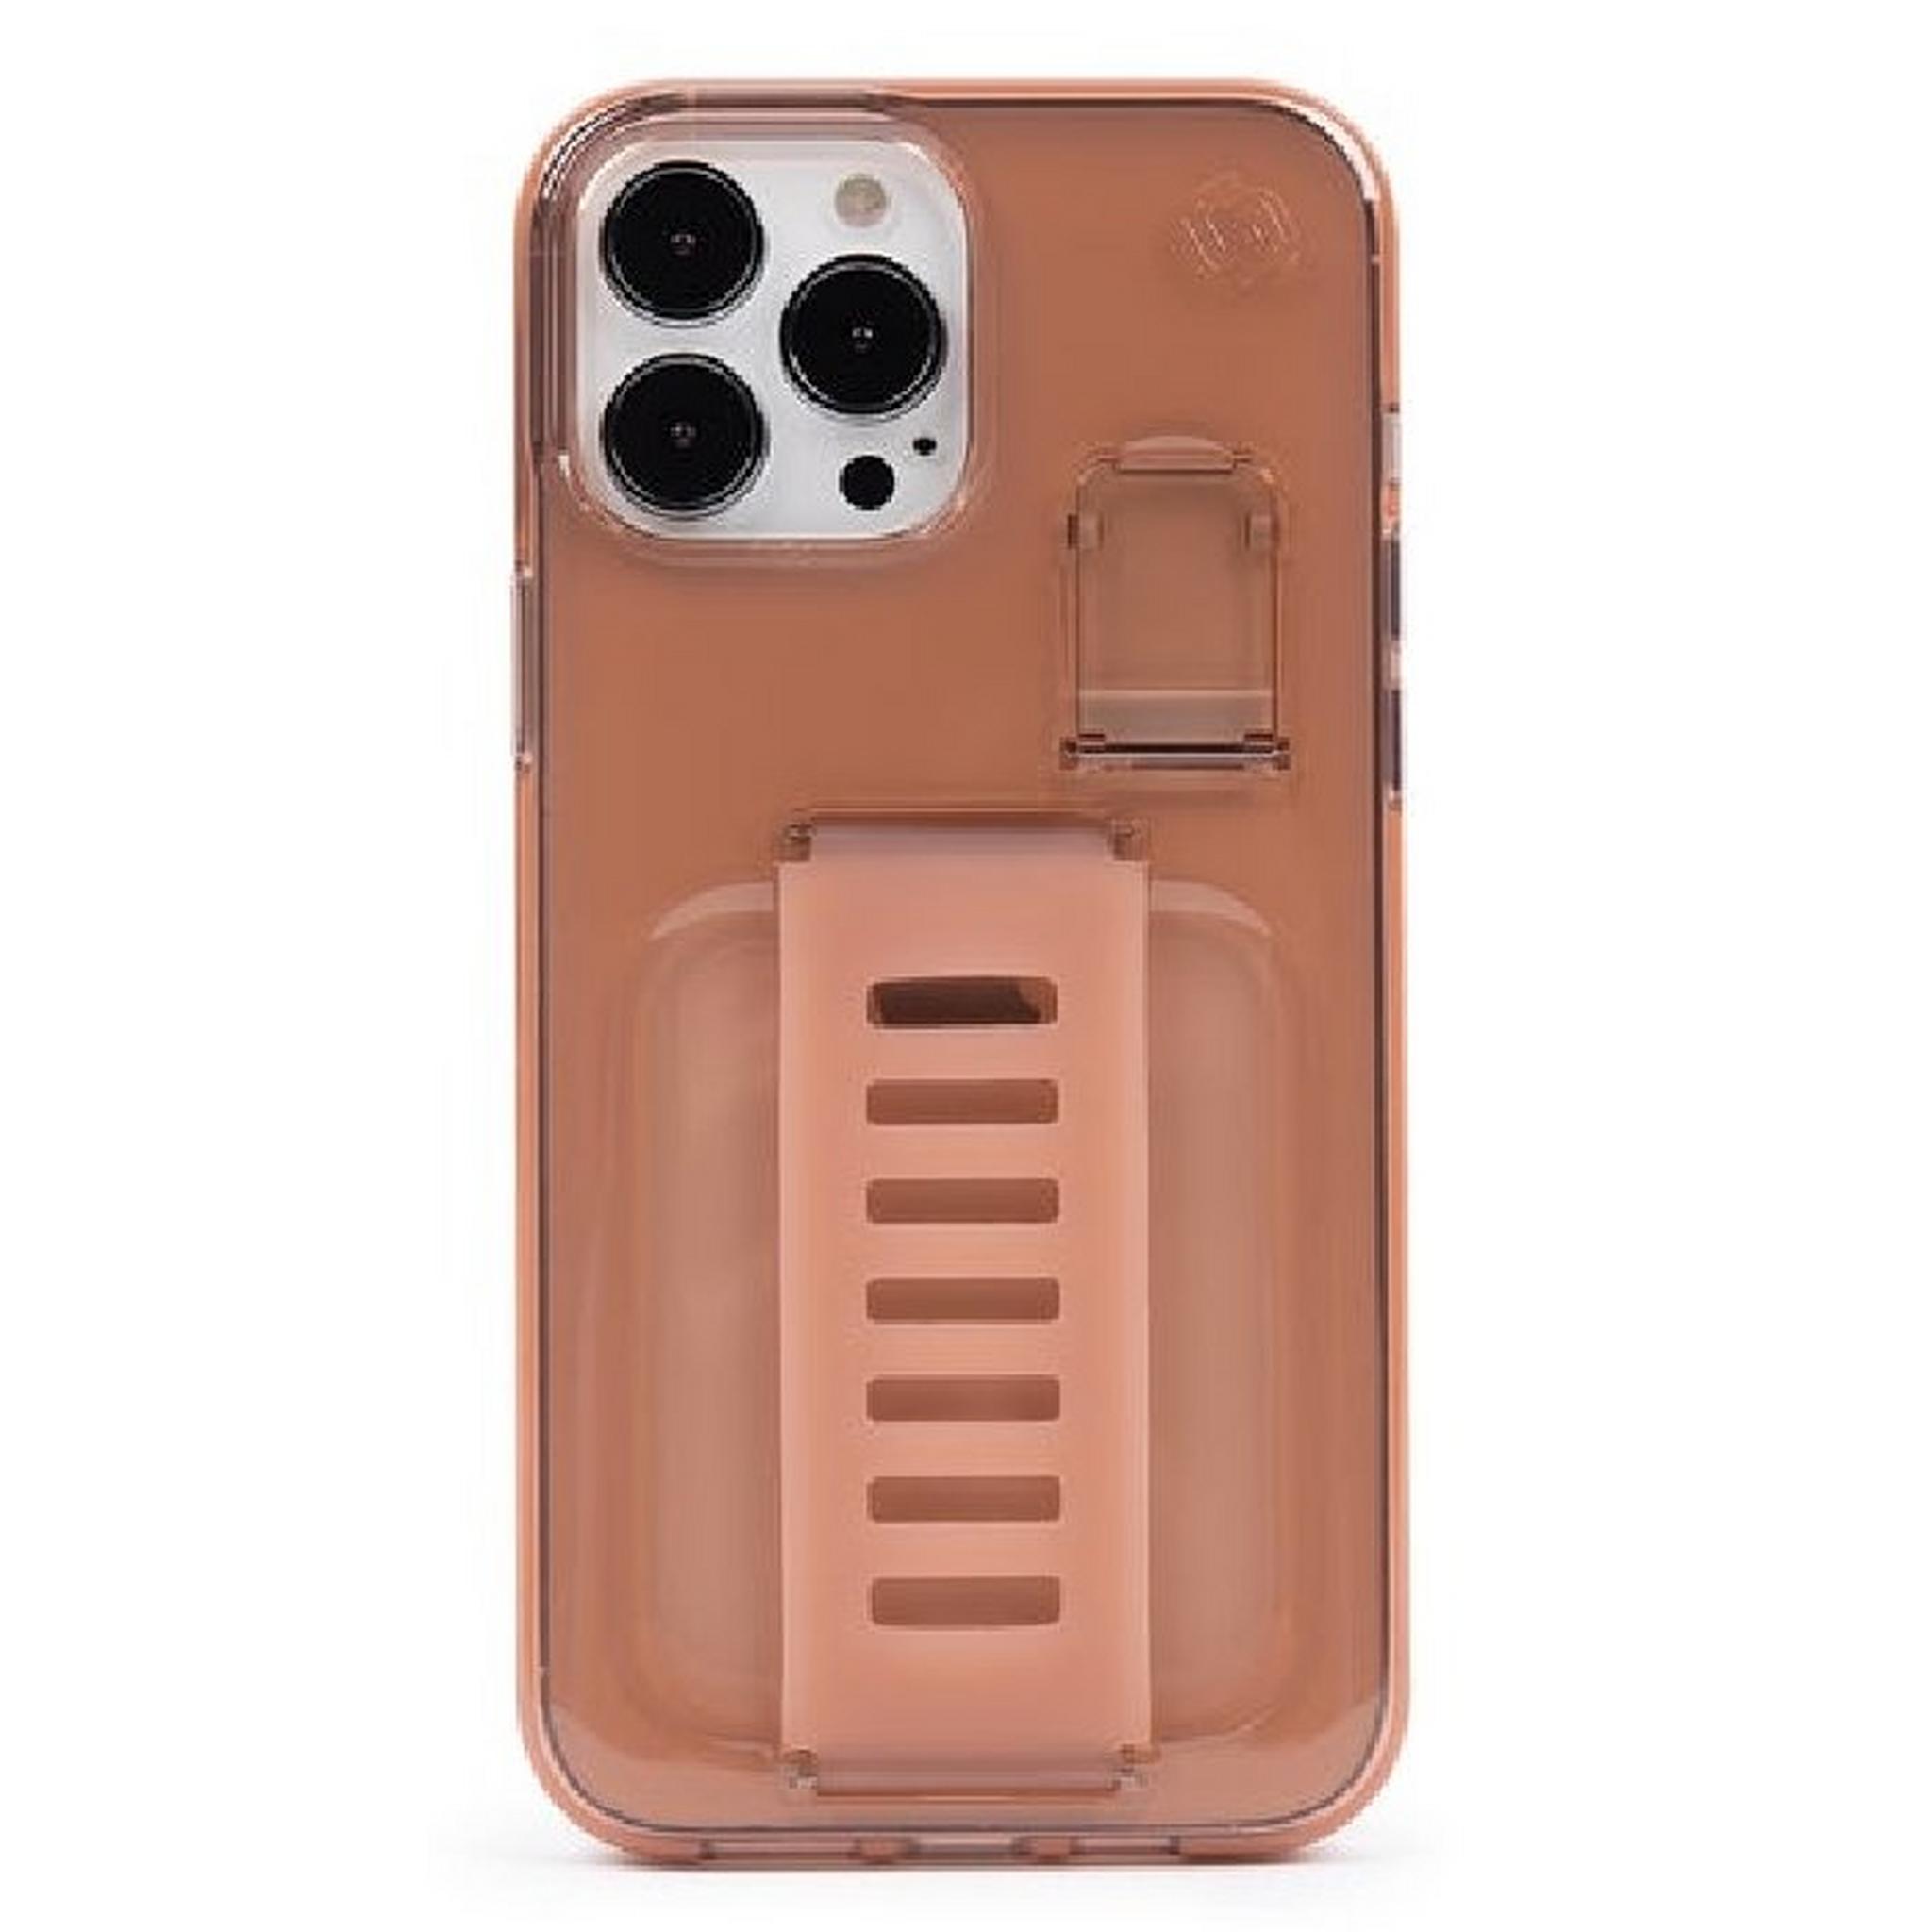 Grip2u Boost Case With Kickstand for iPhone 13 Pro - Paloma